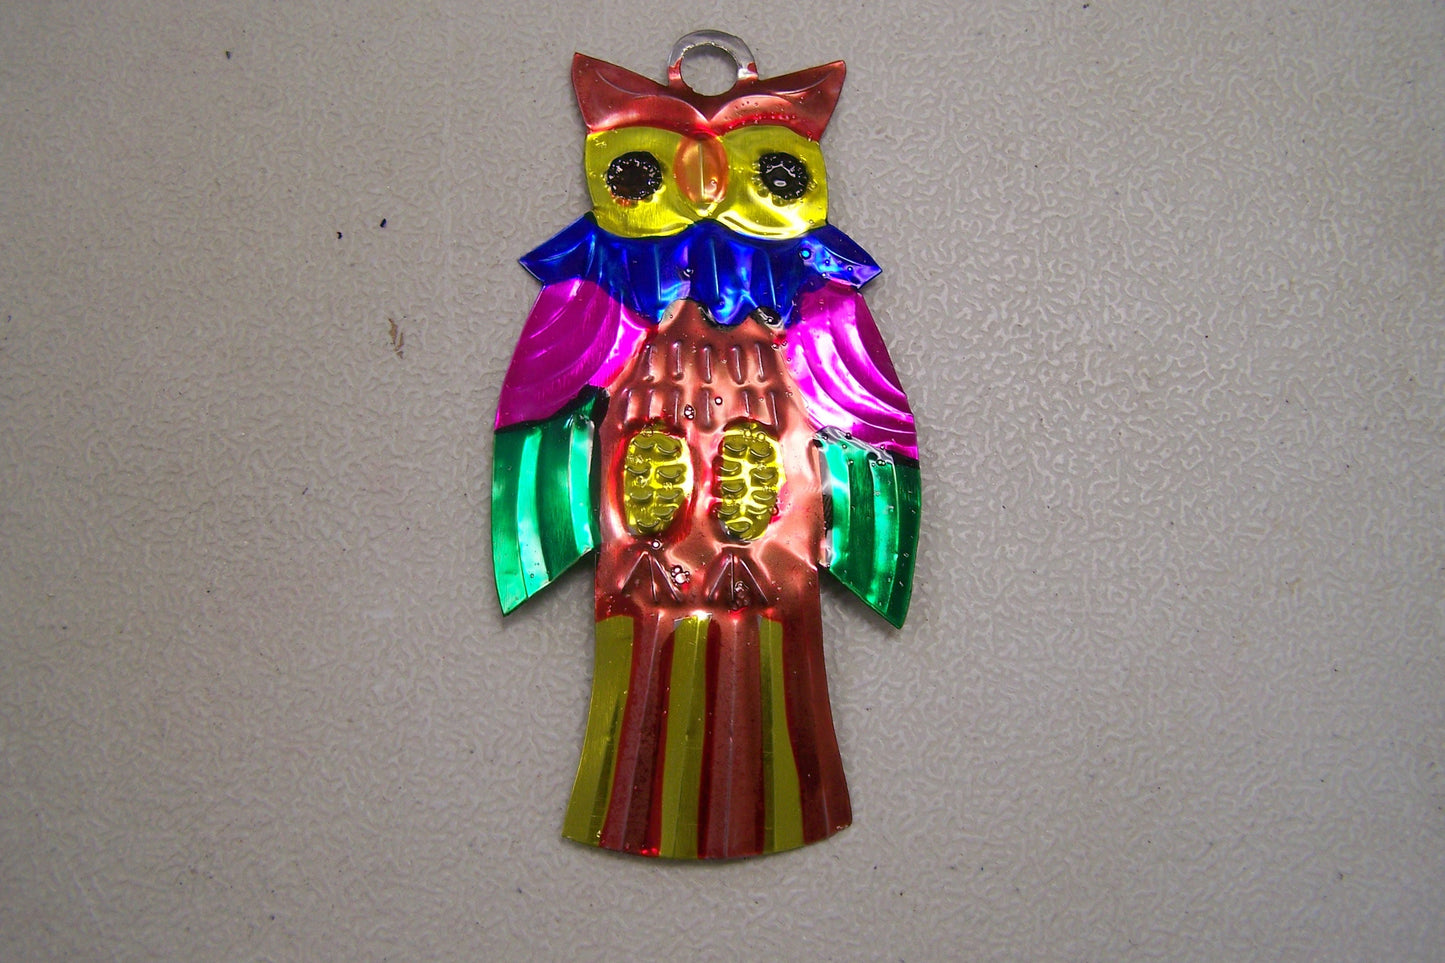 Lot of 6 Tin Painted Ornaments - Owl - Mexico